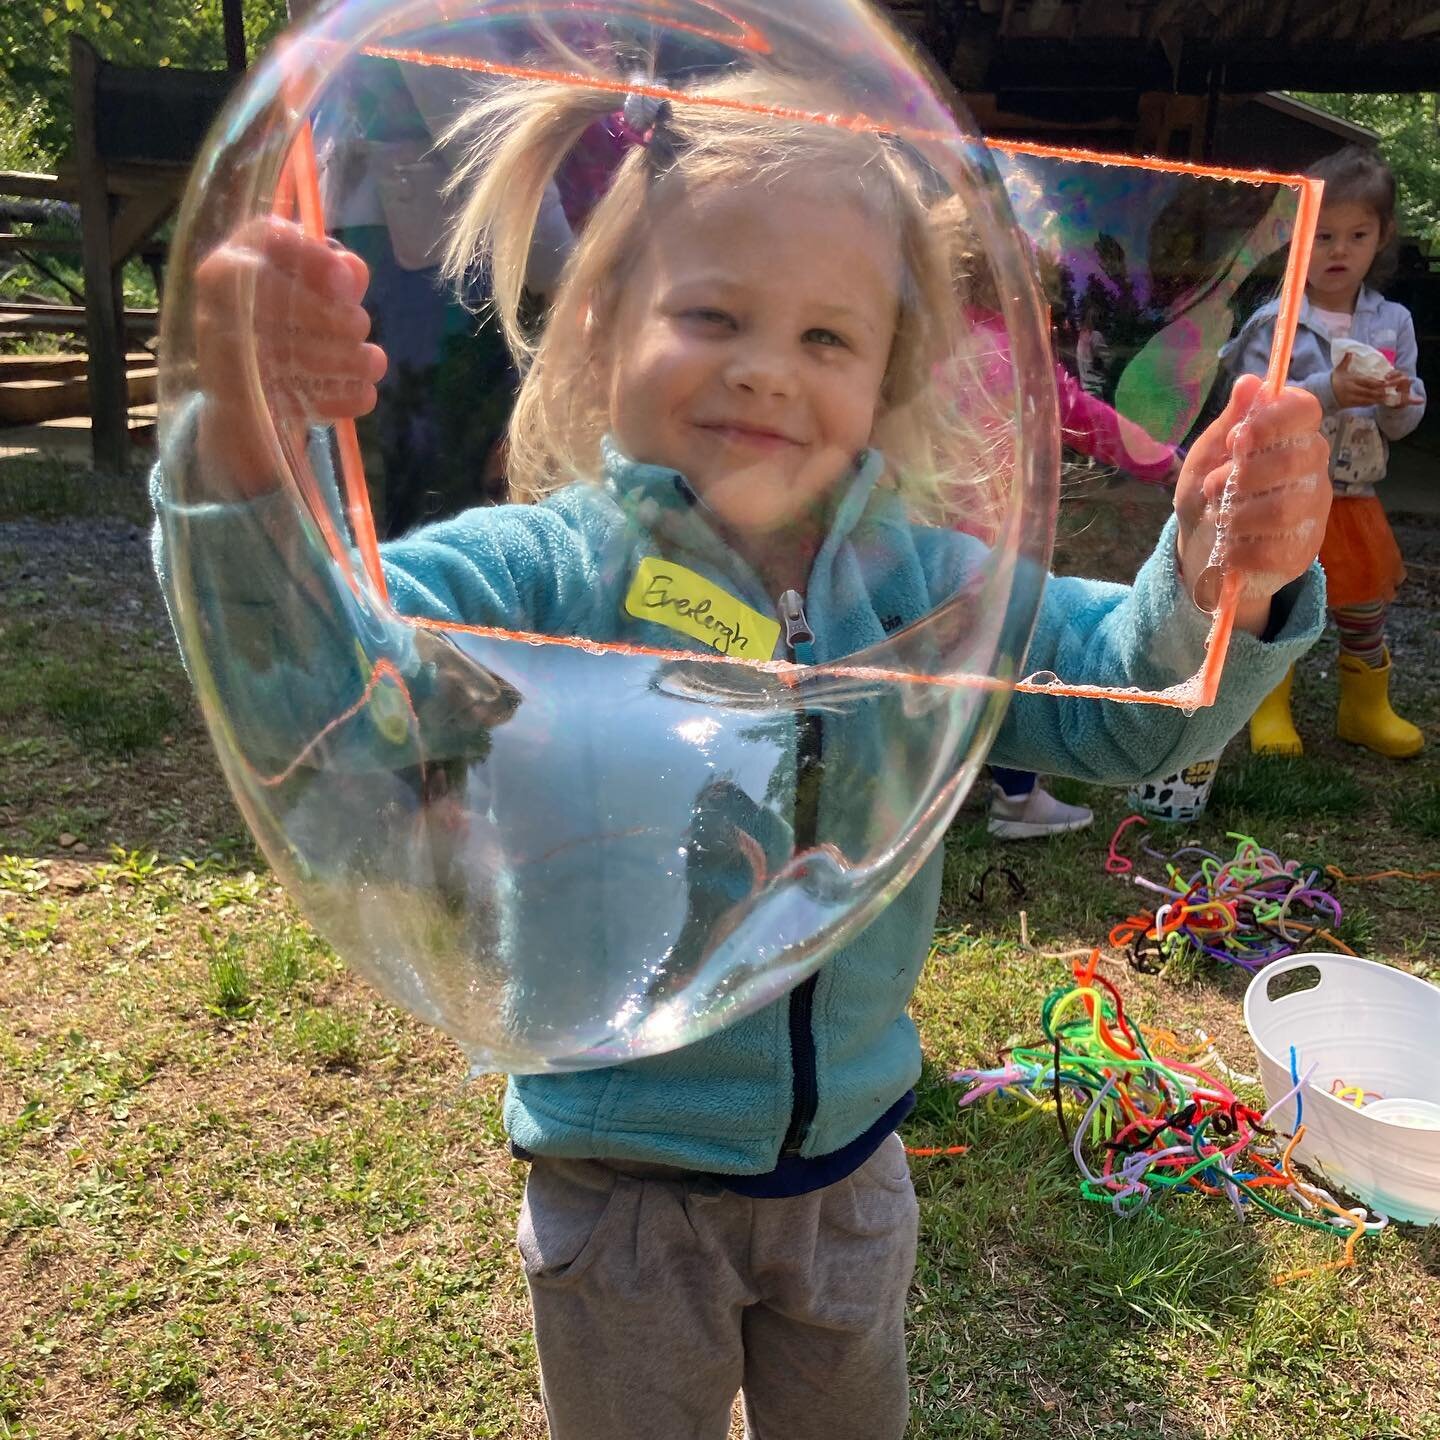 It wasn't very windy for our wind exploration at Explore Together this morning, but we found that we could make some wind with the parachute! A small breeze helped us blow bubbles, but we were also able to make some wind with our lungs 😁 Some ribbon